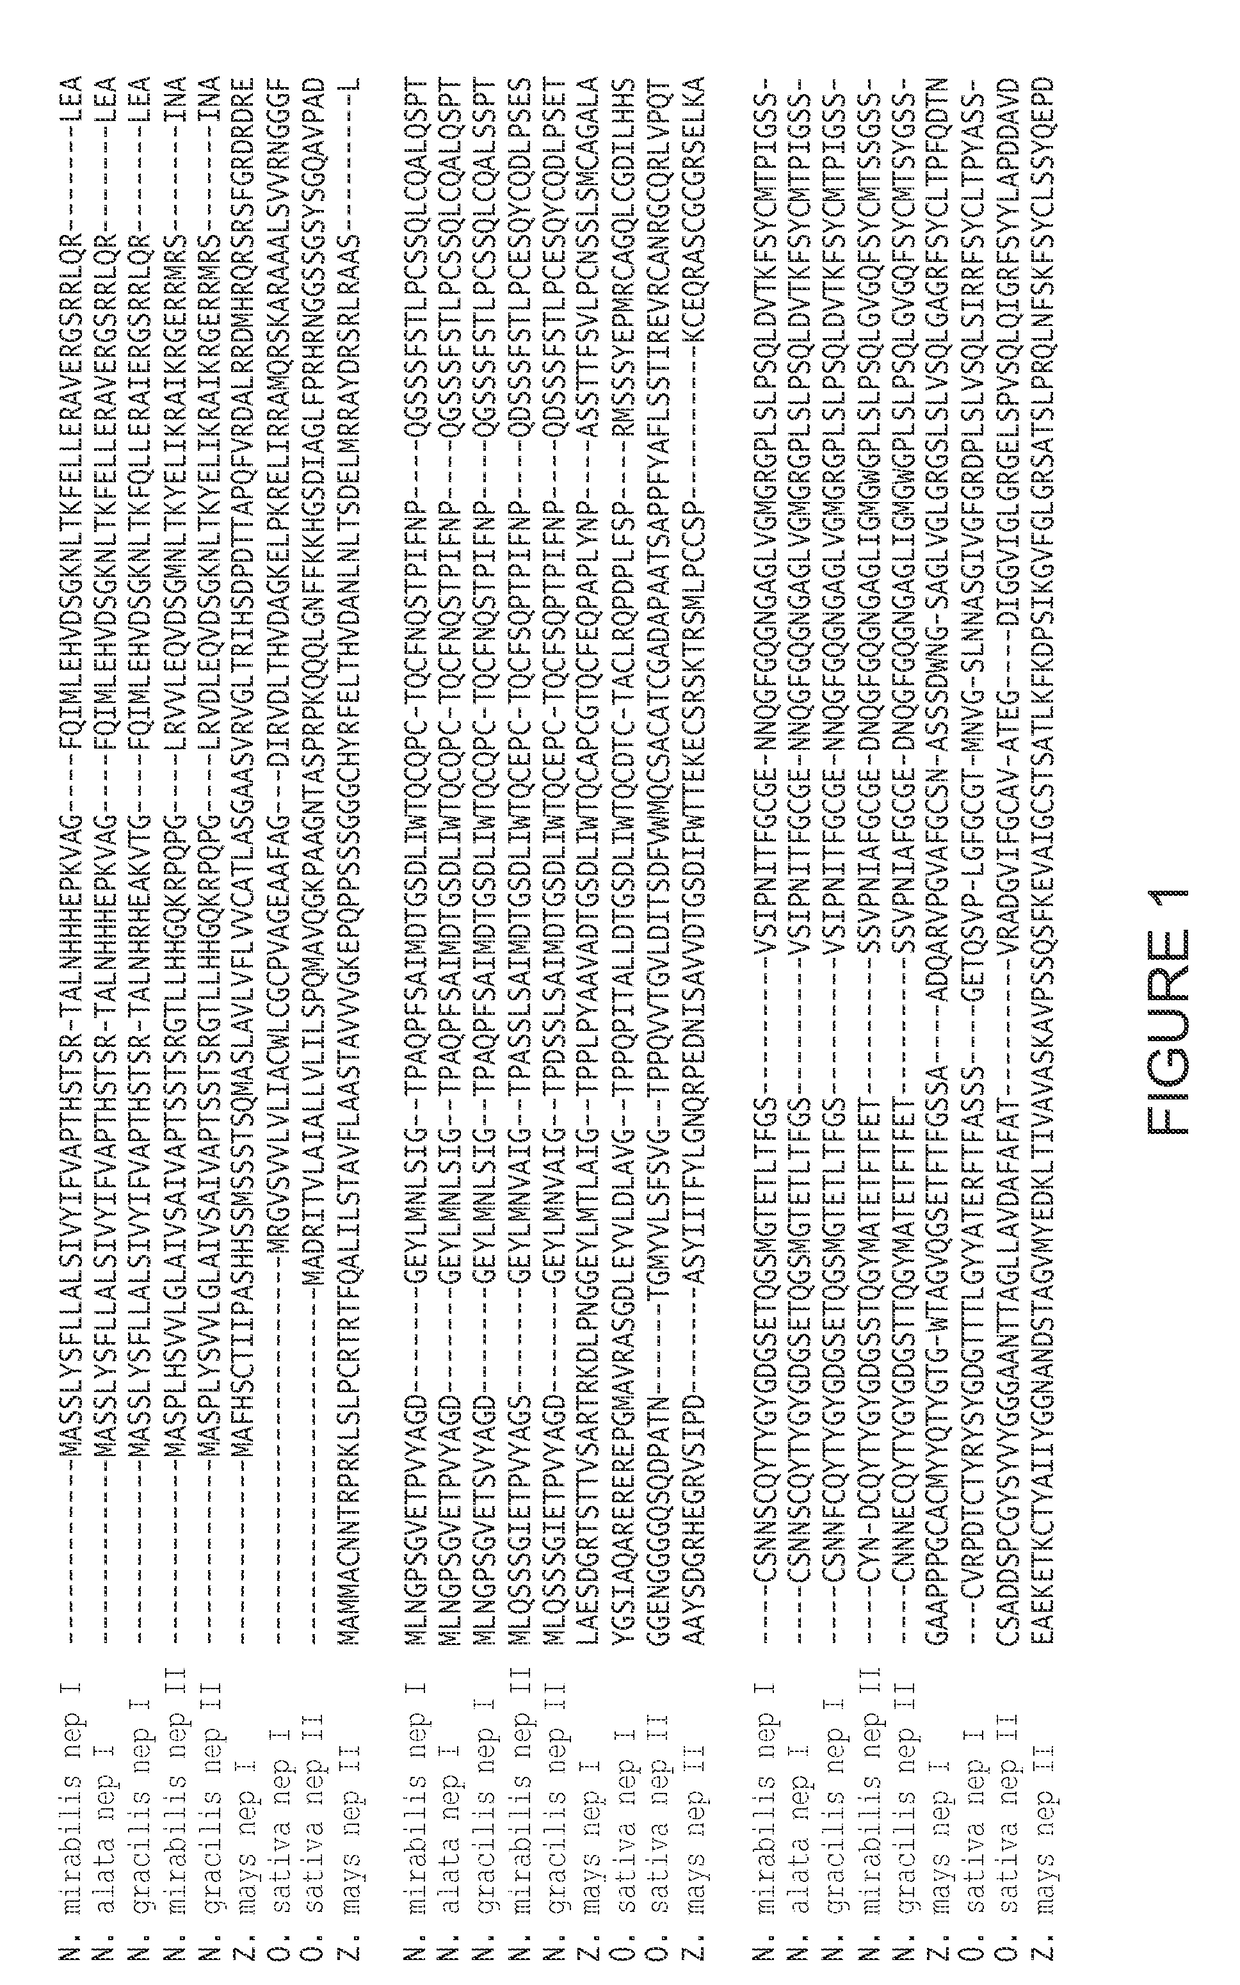 Compositions and methods for treating gluten intolerance and disorders arising therefrom